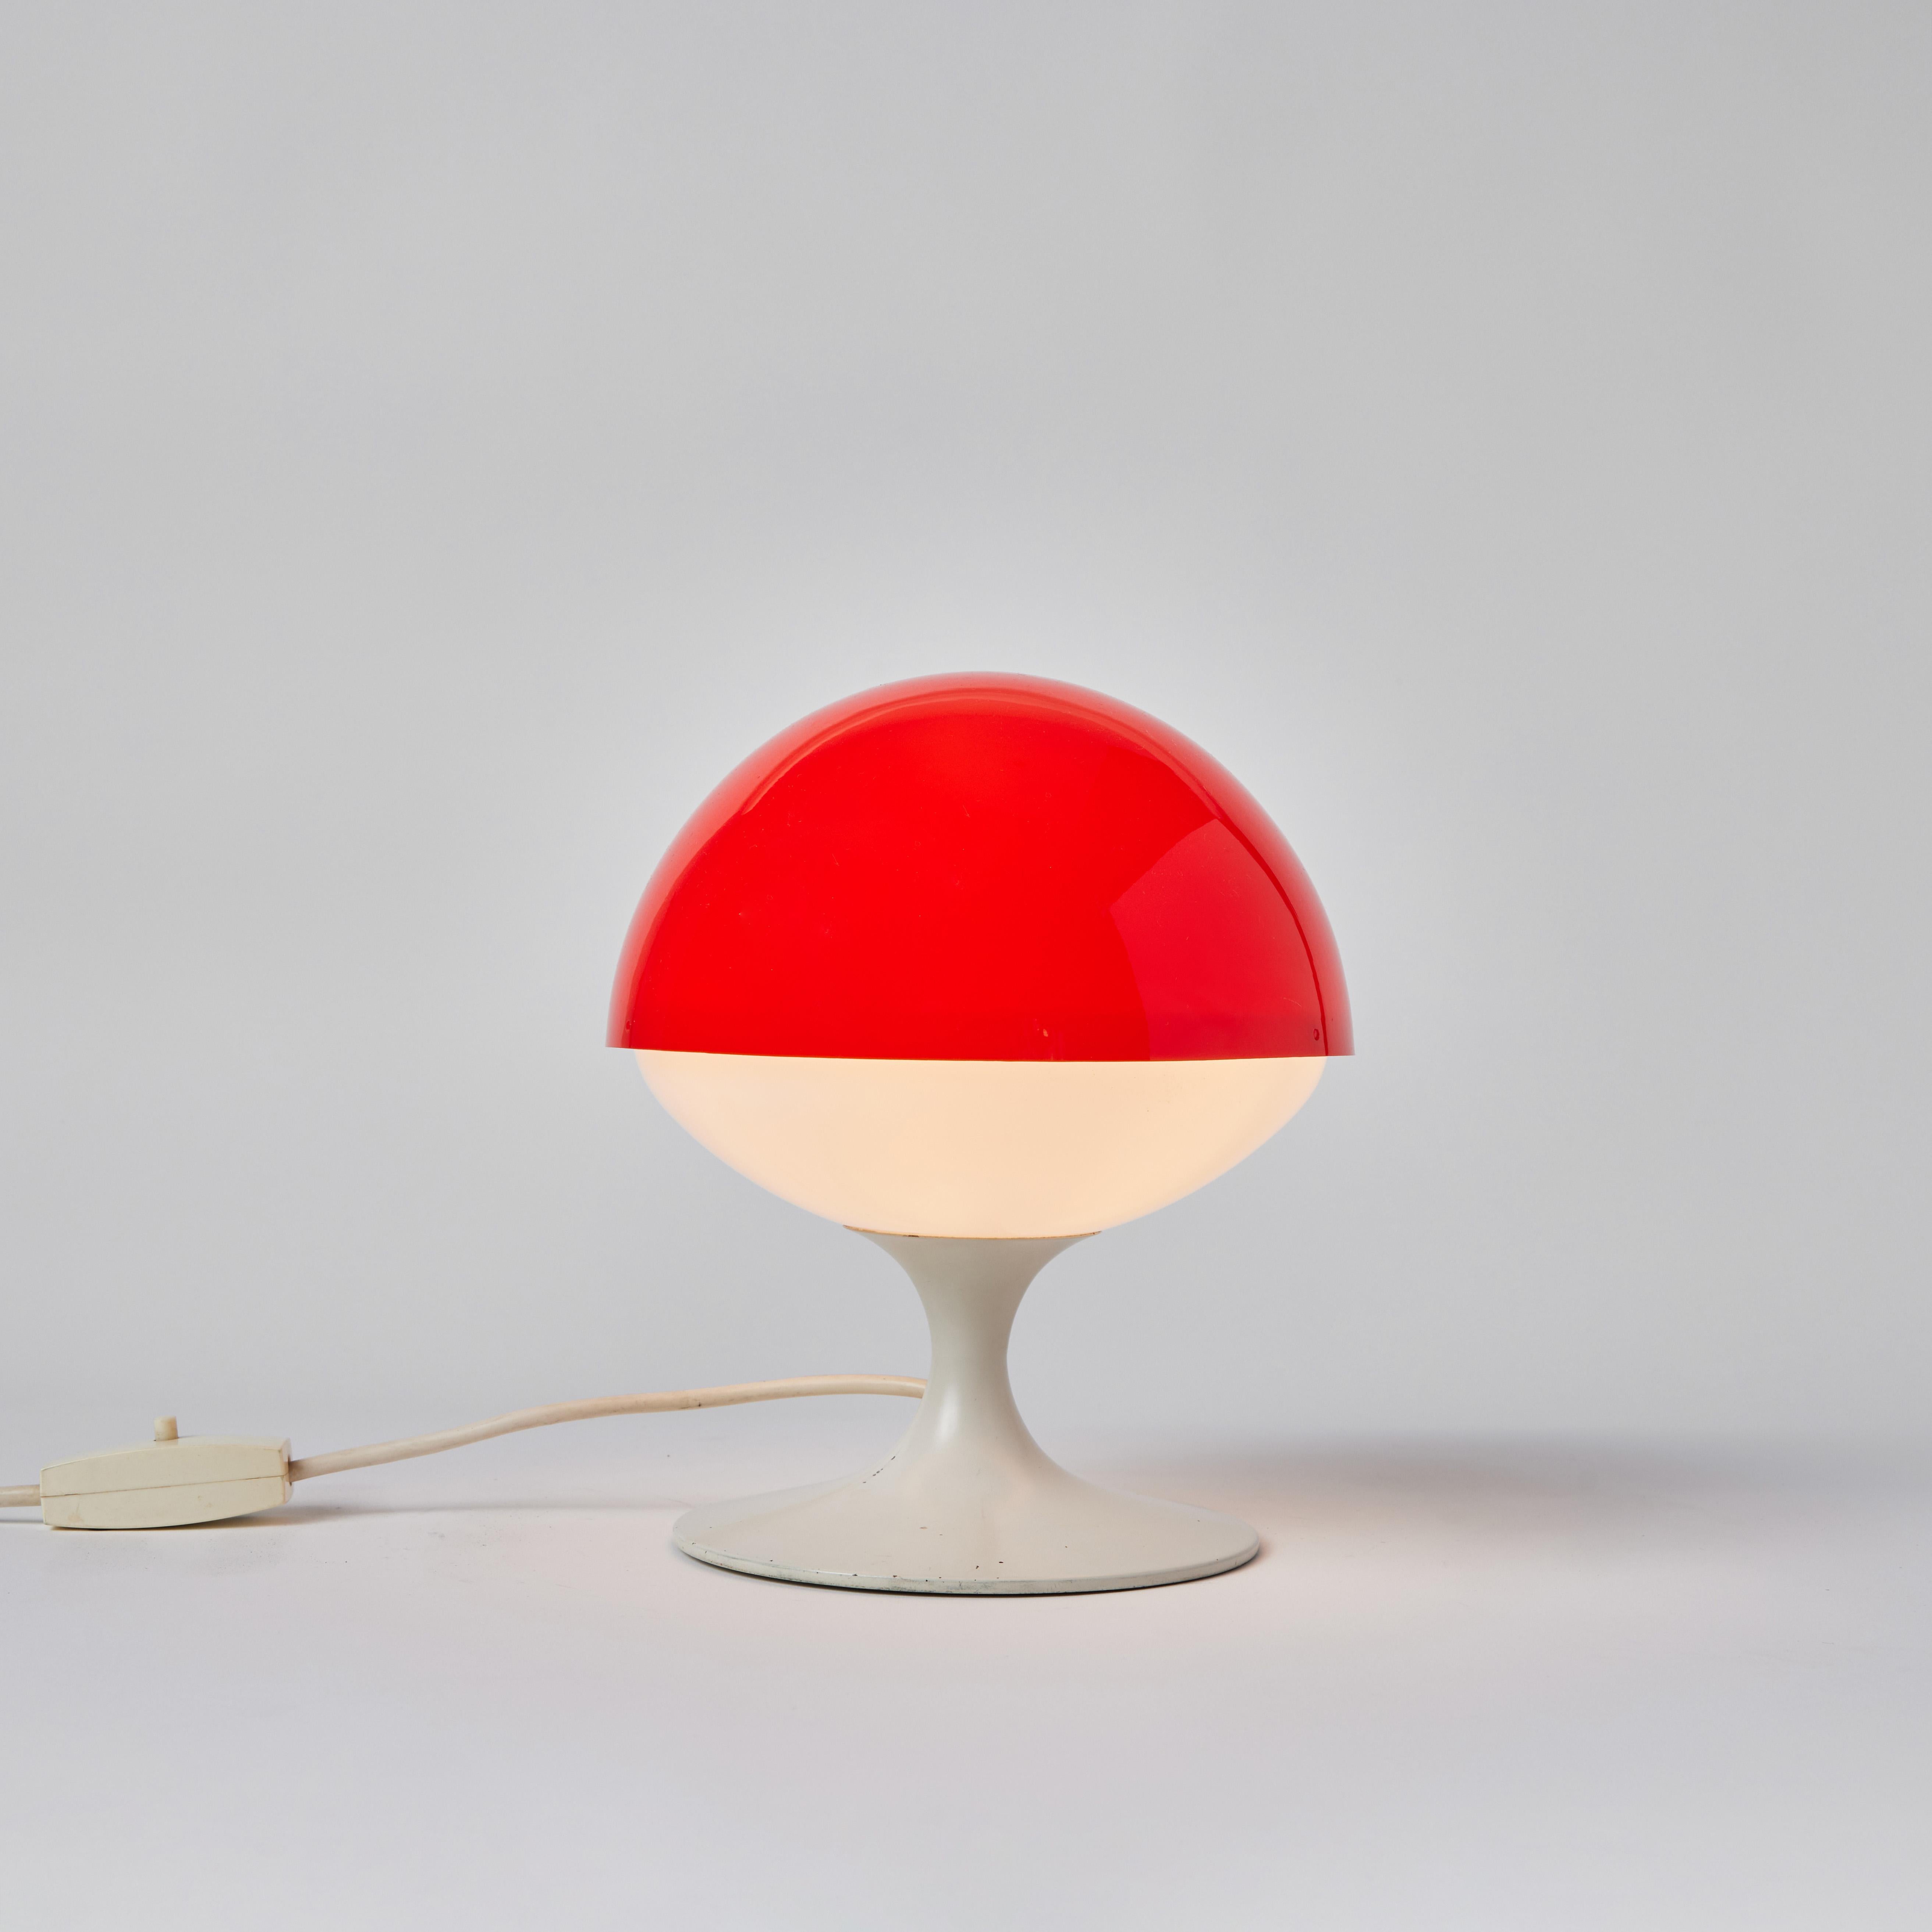 Pair of 1960s Max Bill Red & White Table Lamps for Temde Leuchten, Switzerland For Sale 2